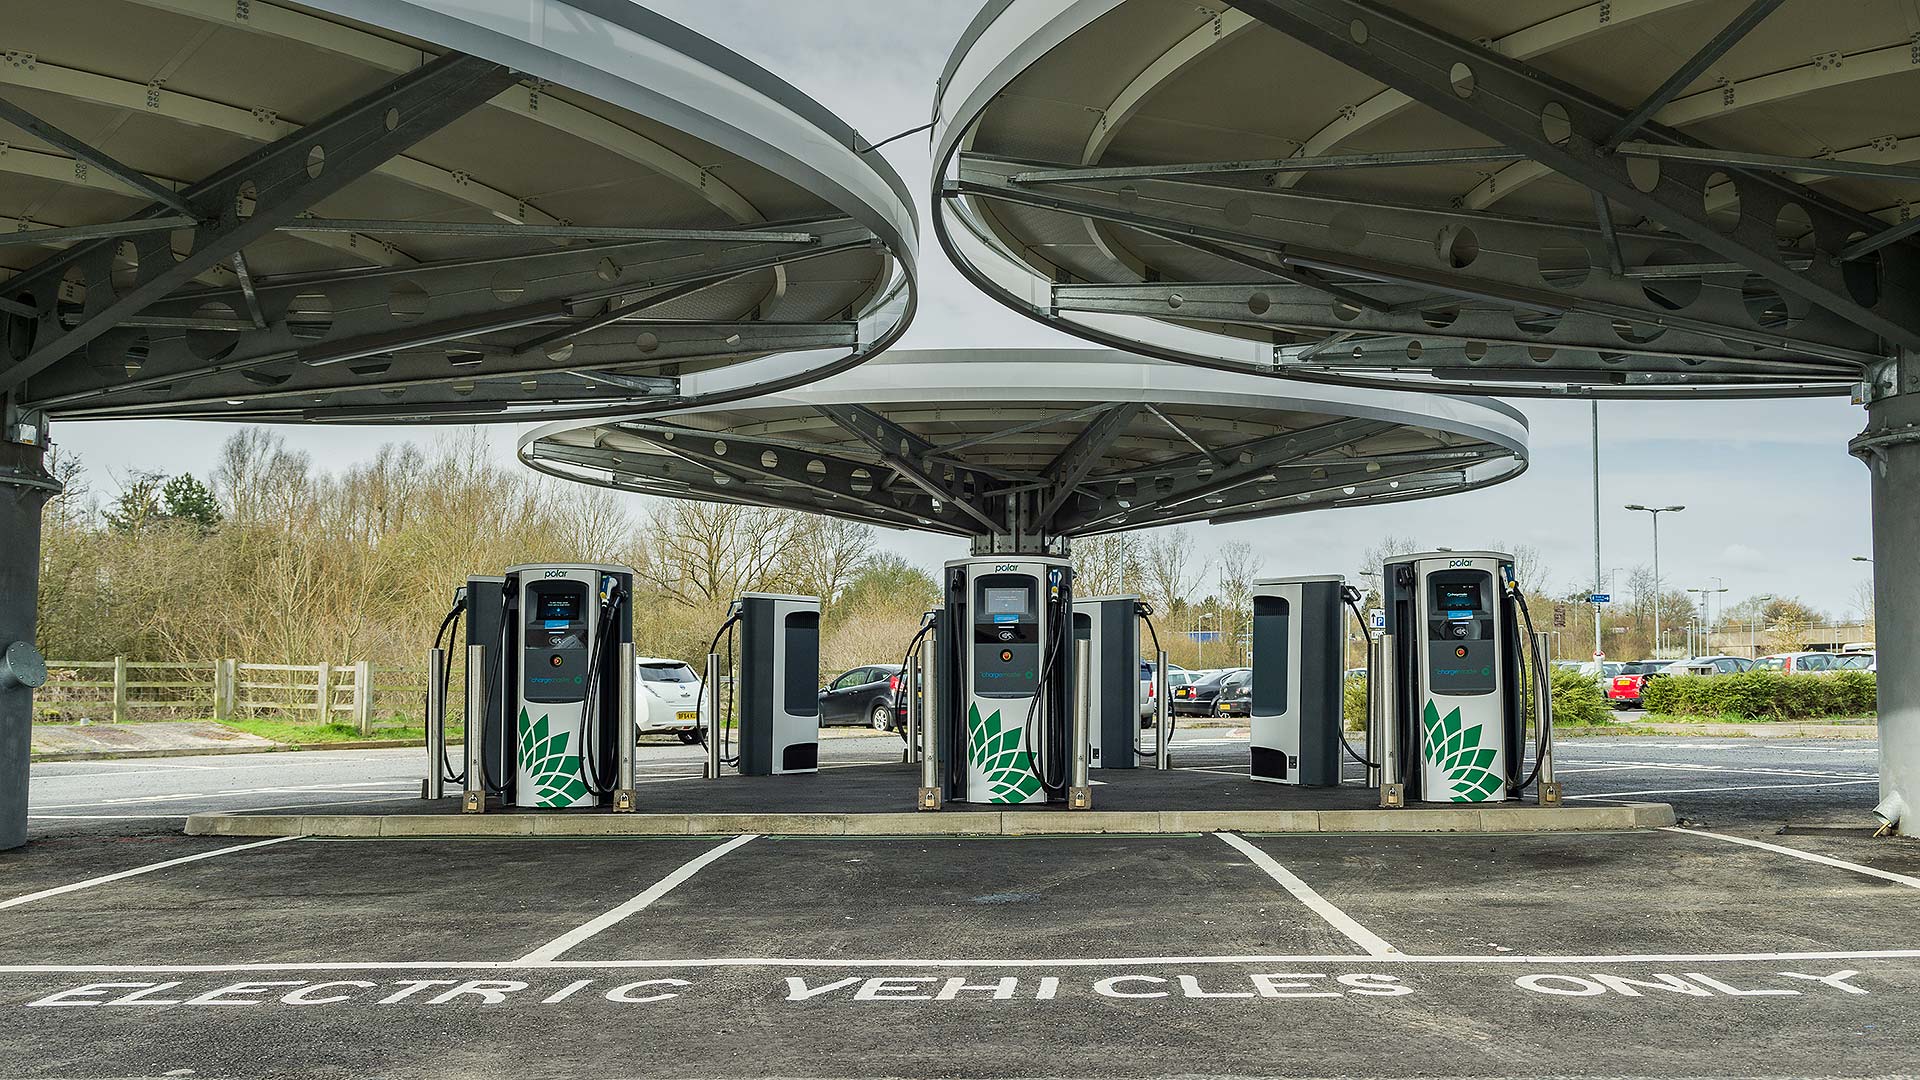 A beginners’ guide to electric car charge points